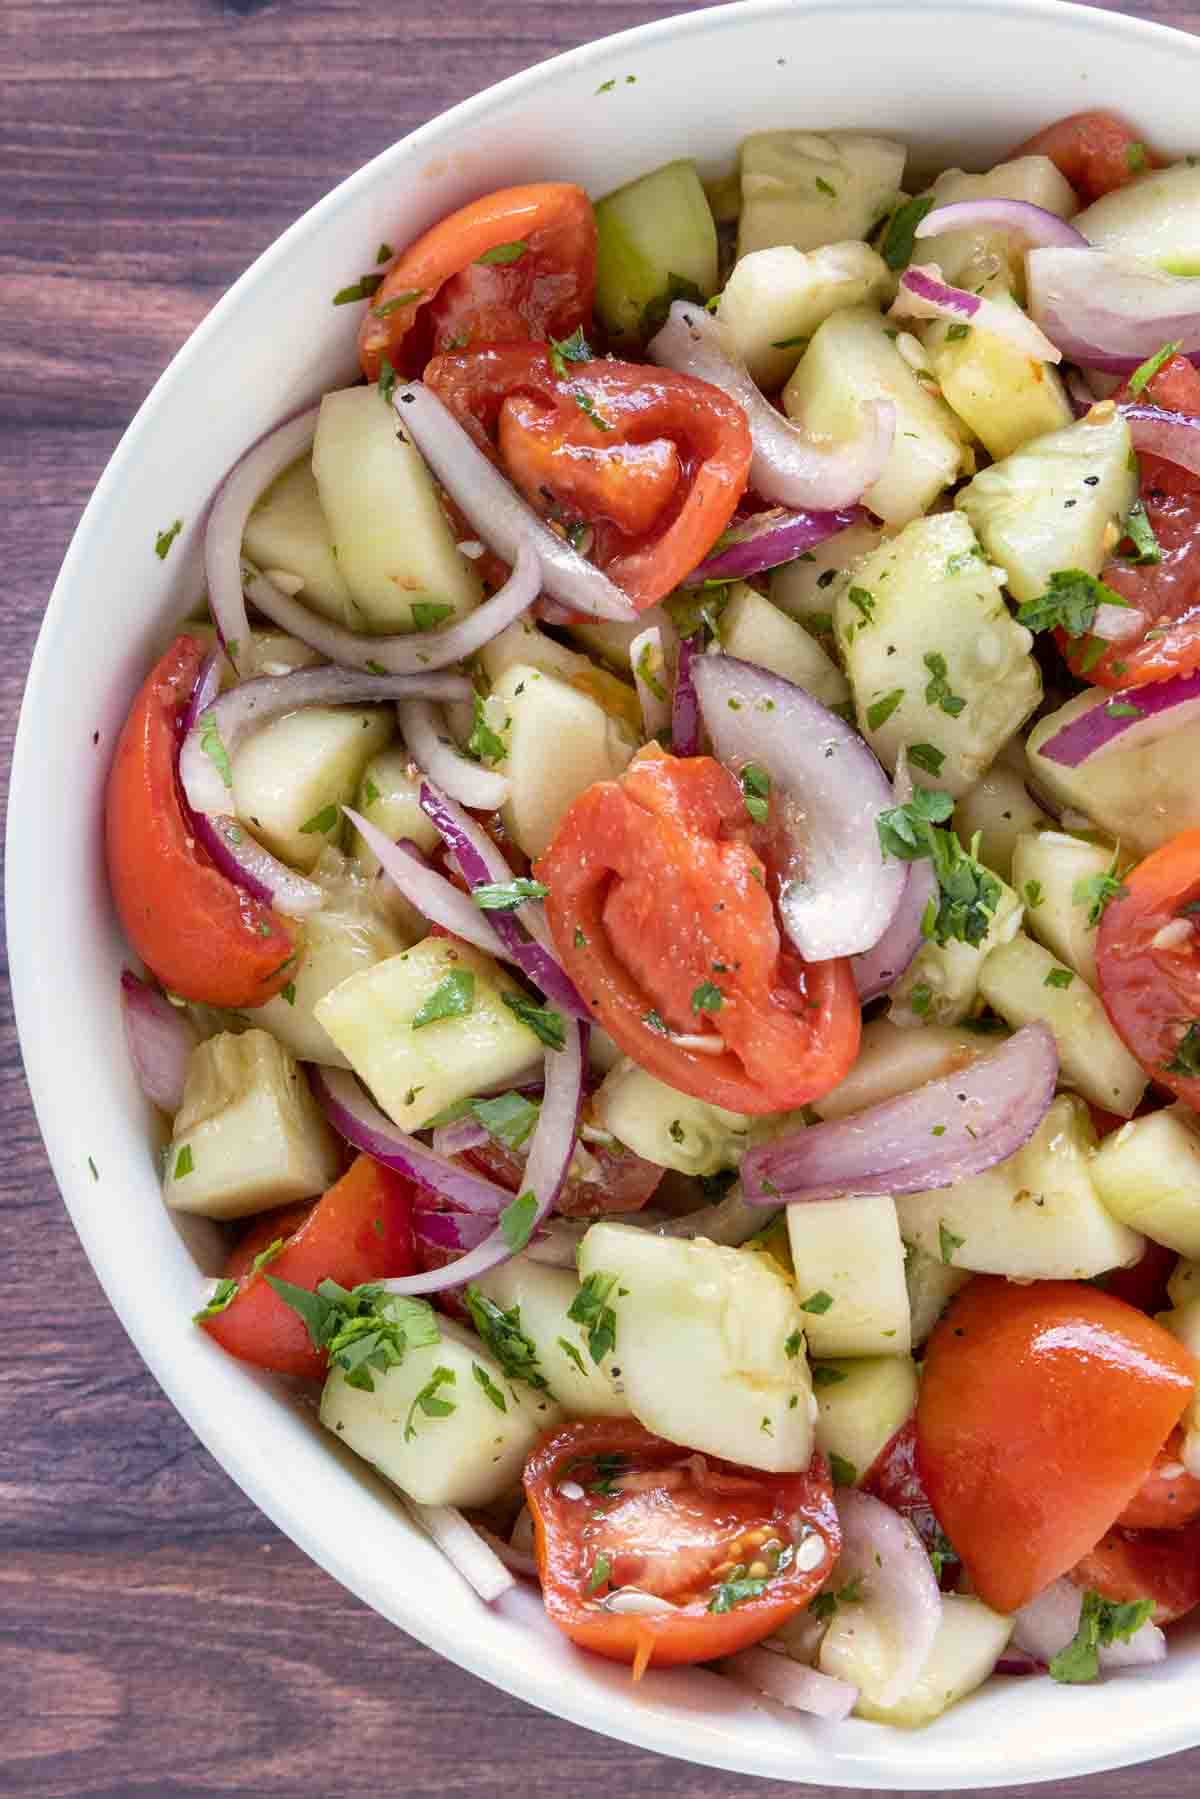 Cucumber tomato salad in a white bowl.